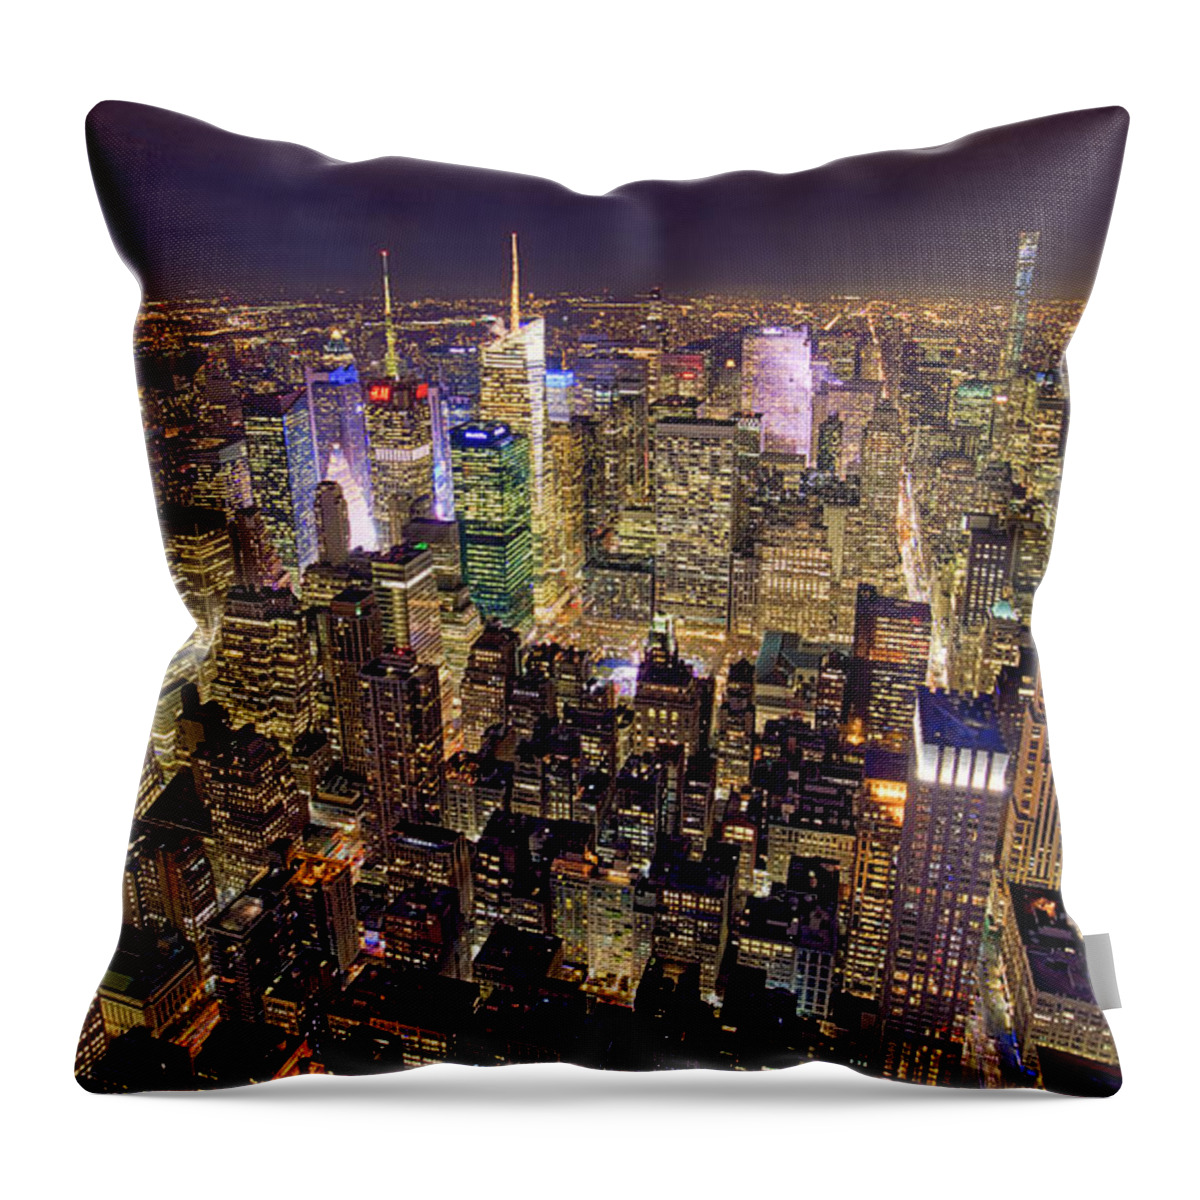 Hdr Throw Pillow featuring the photograph Across Manhattan by Ross Henton